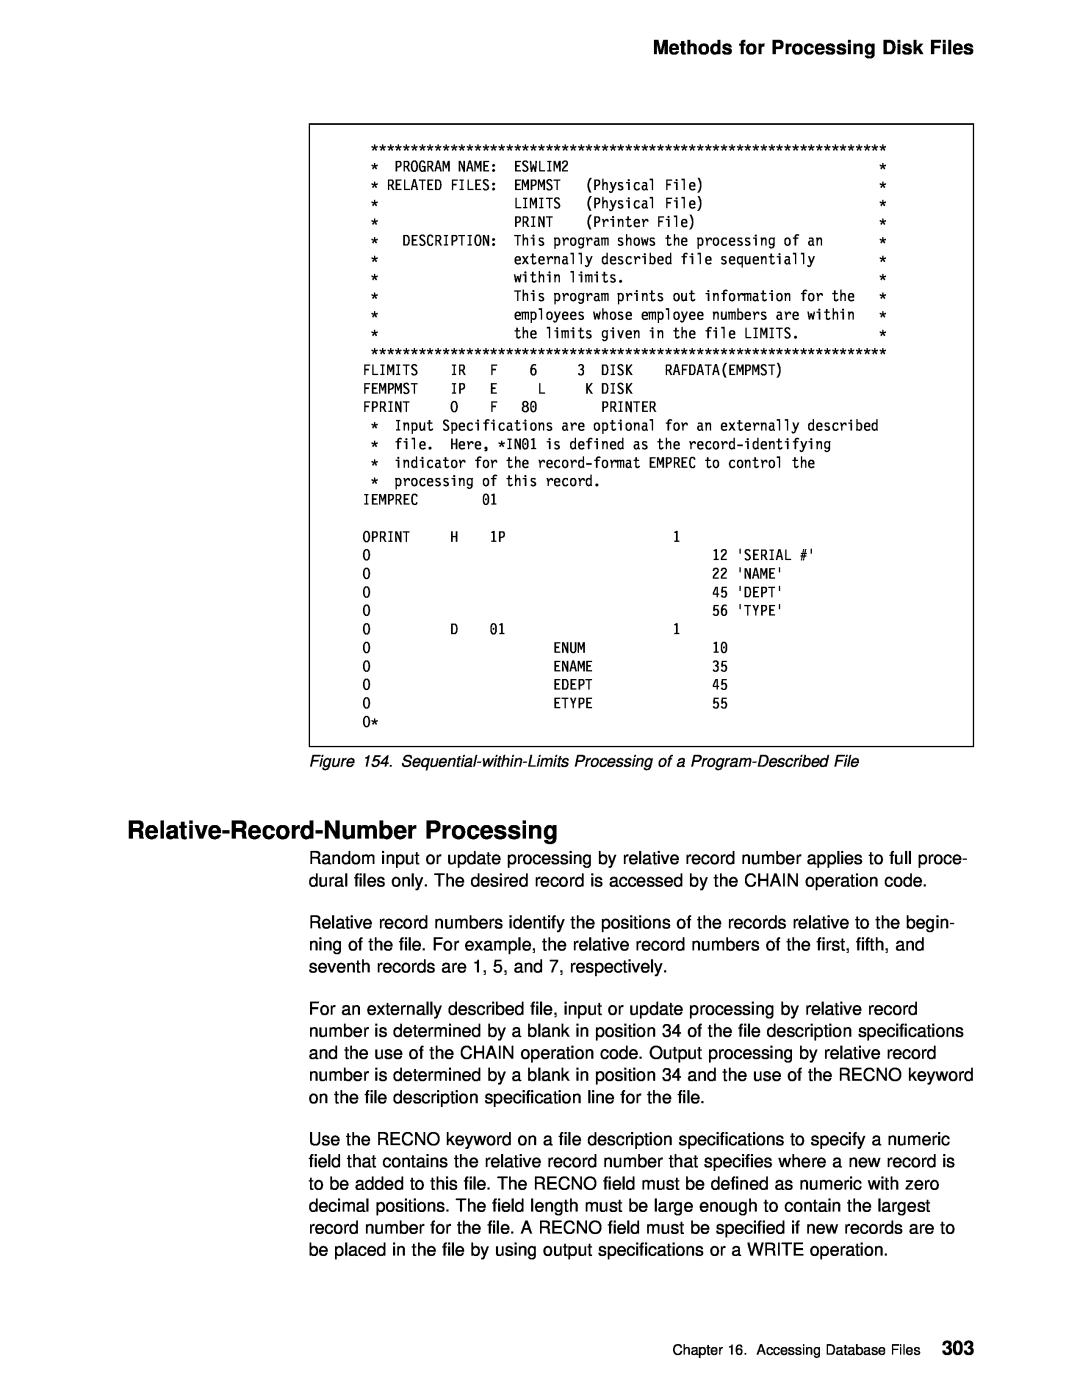 IBM AS/400 manual Relative-Record-Number Processing, Methods for Processing Disk Files 